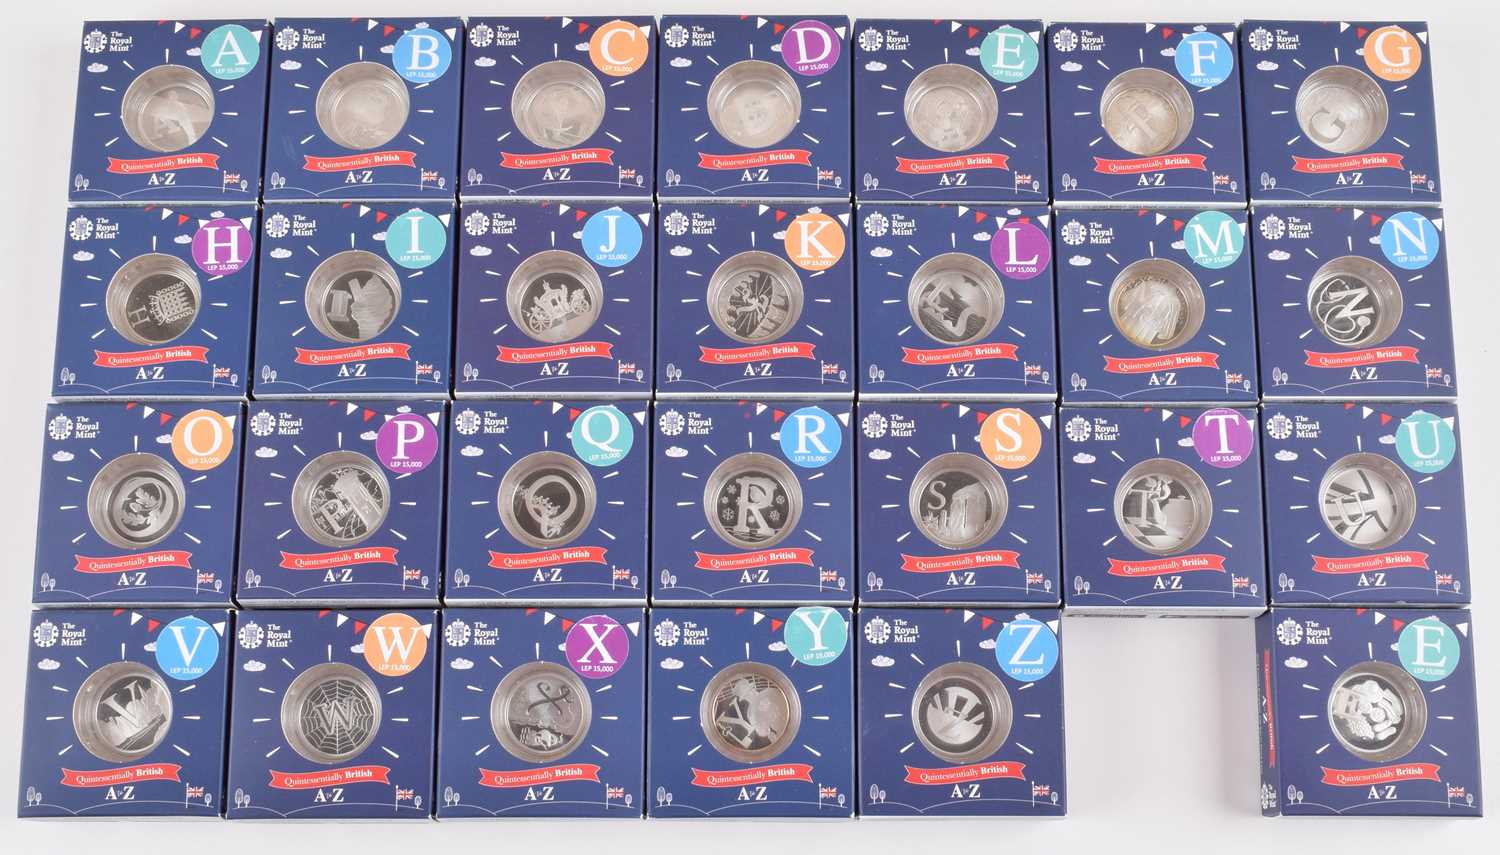 Lot Complete Queen Elizabeth II, Royal Mint, A to Z UK 10p Silver Proof Coin Collection, 2018.